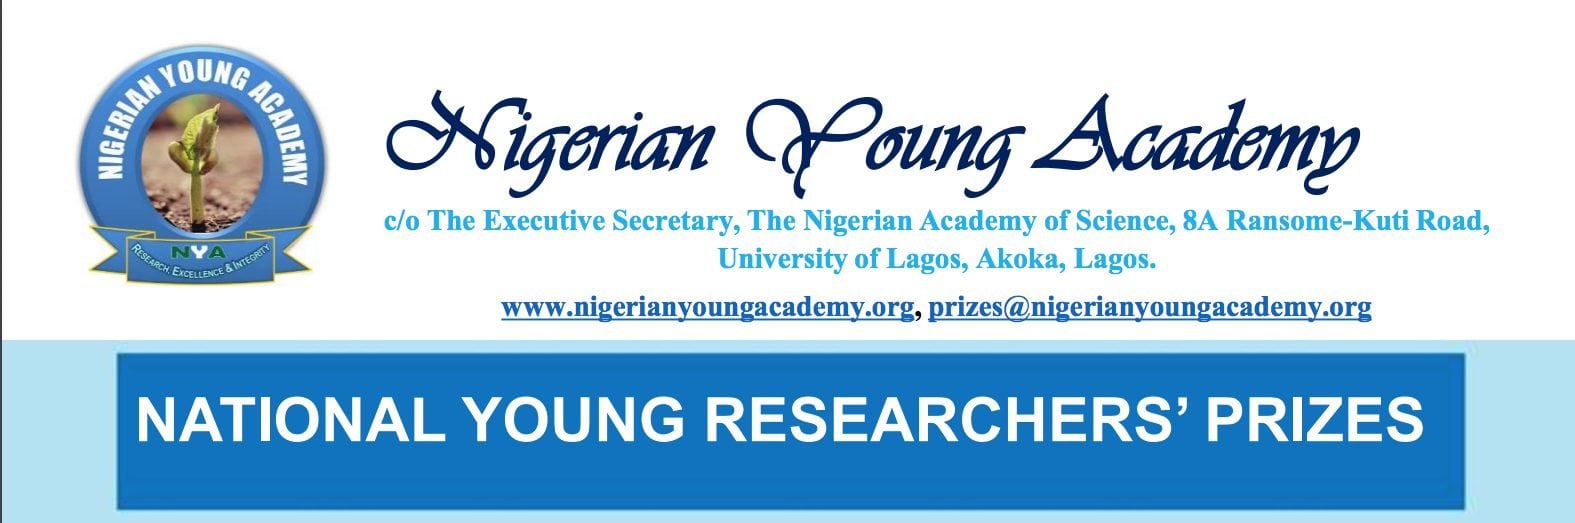 Nigerian Young Academy (NYA) National Young Researcher’s Prizes